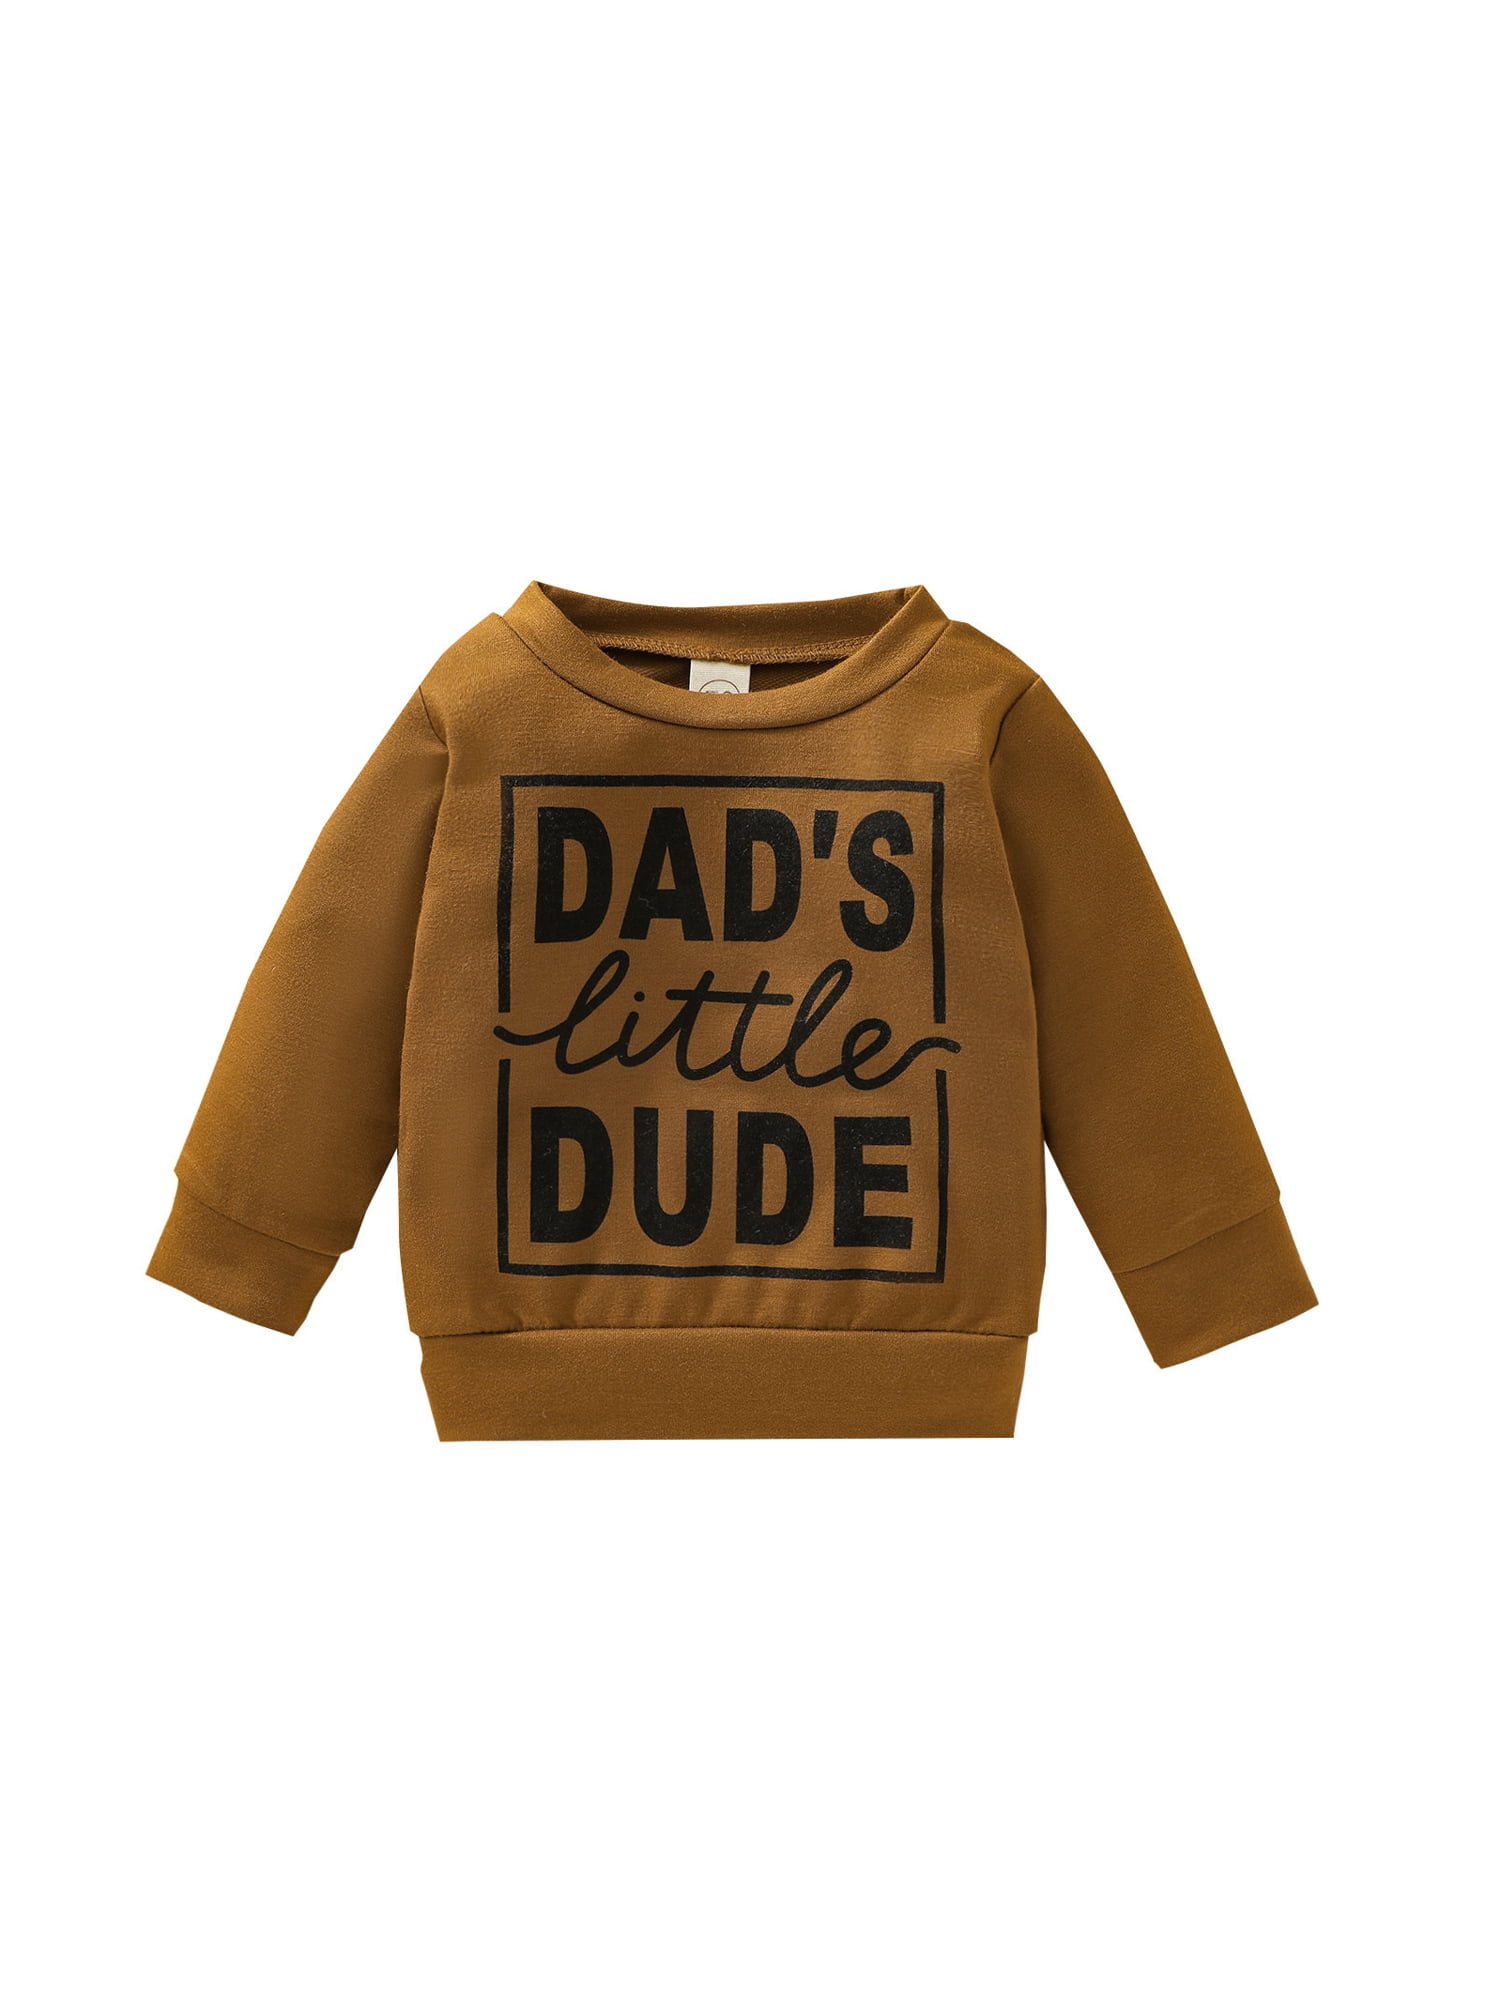 Newborn Baby Boy Long Sleeve Sweatshirt Pullover Dad's Little Dude Shirt Tops Infant Fall Winter Blouse Clothes 